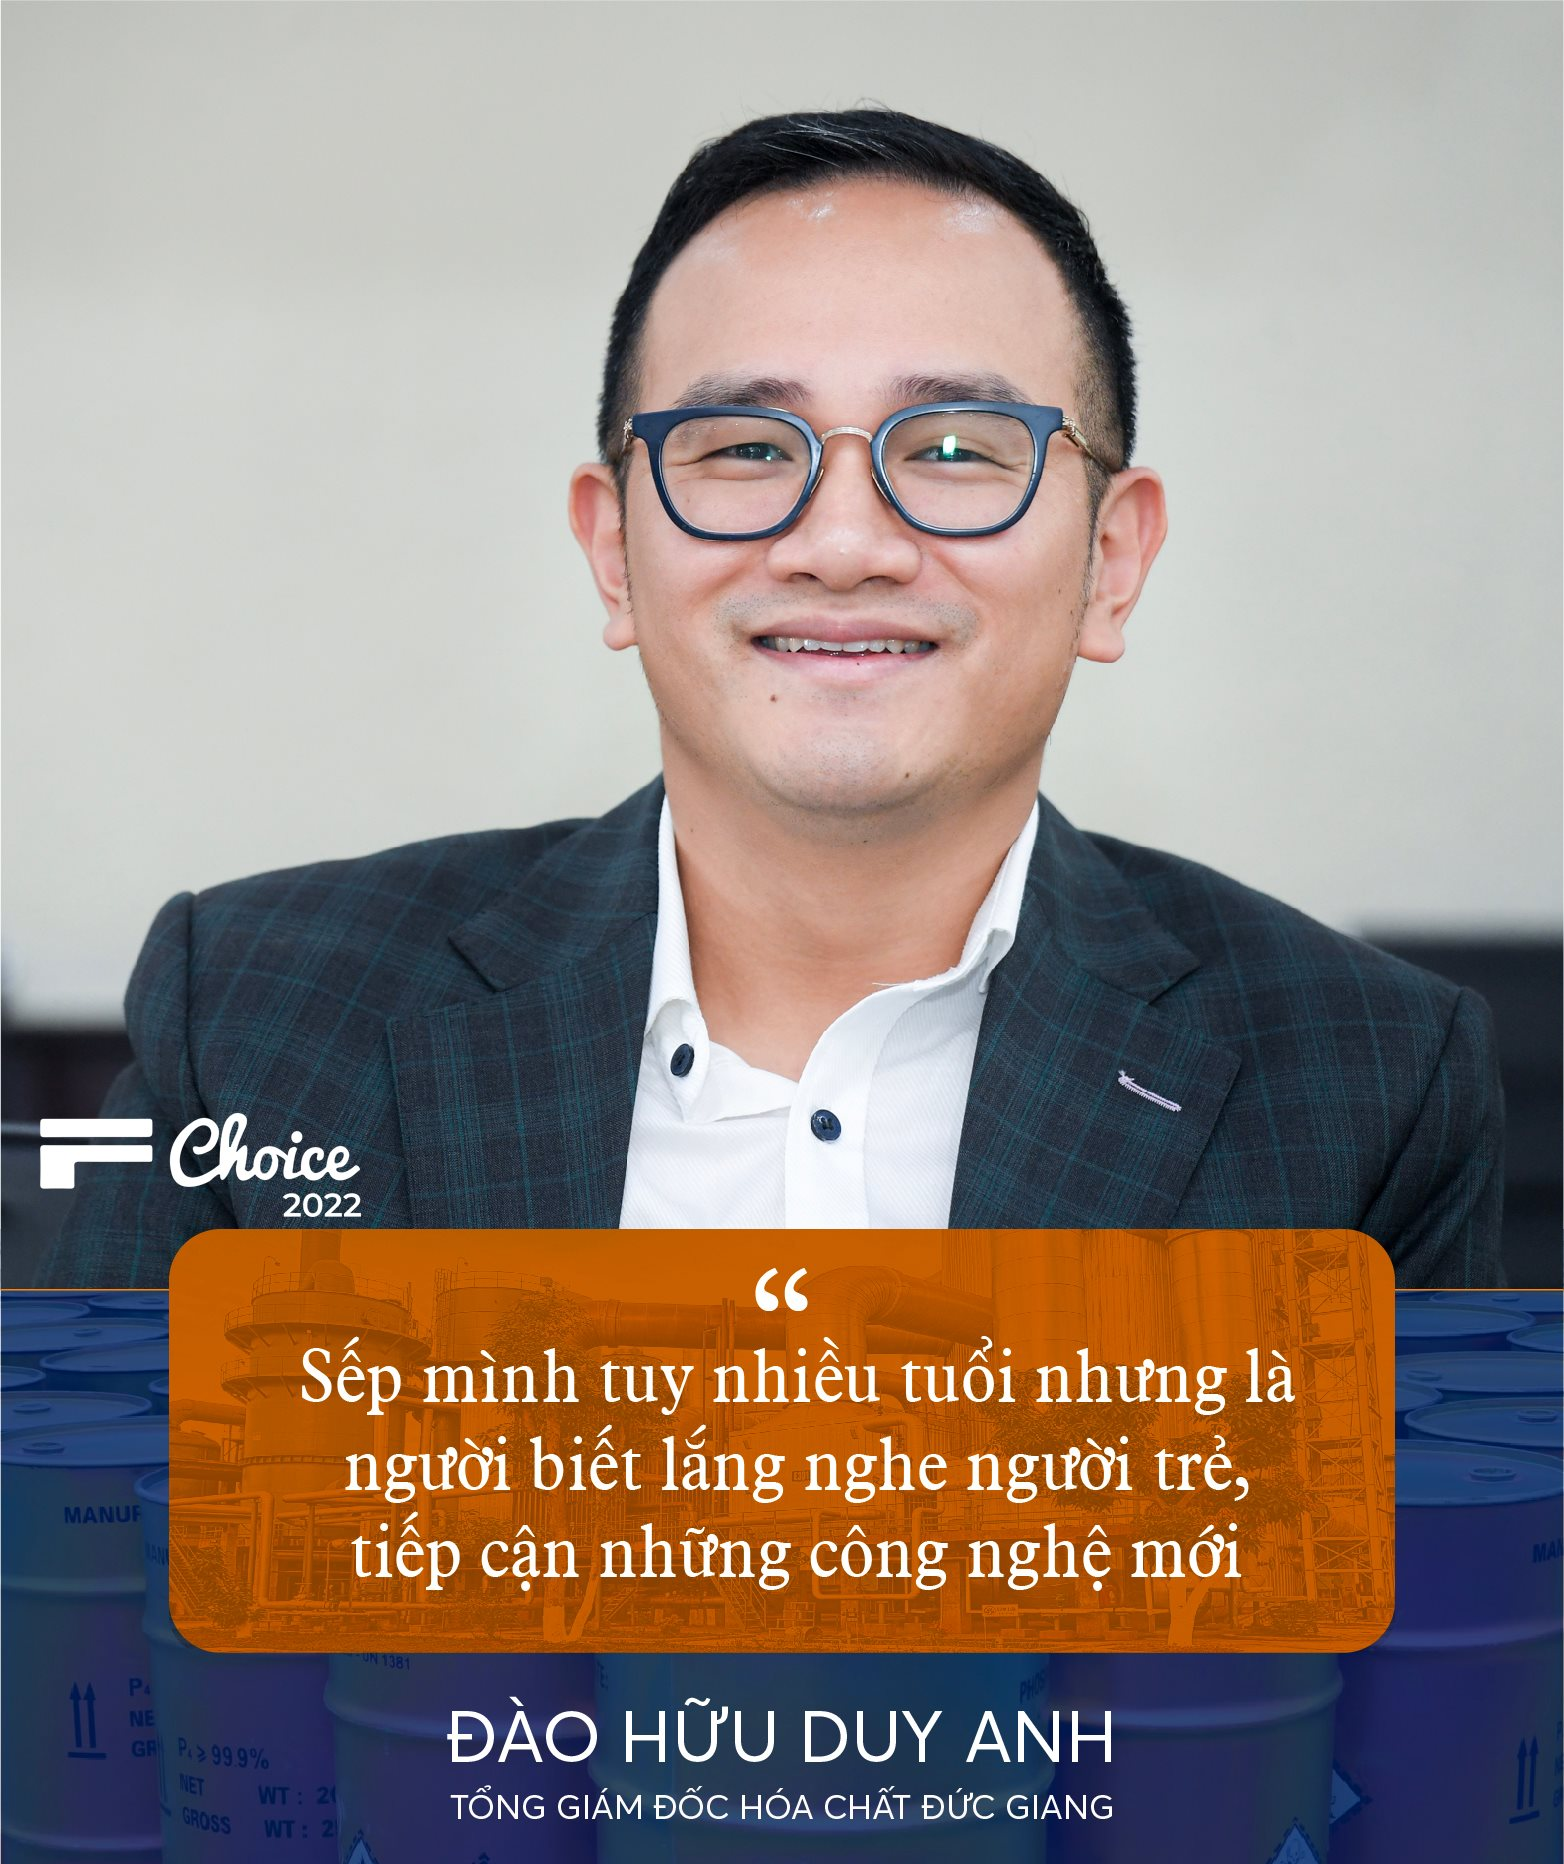 quote-2-mobi-05.png